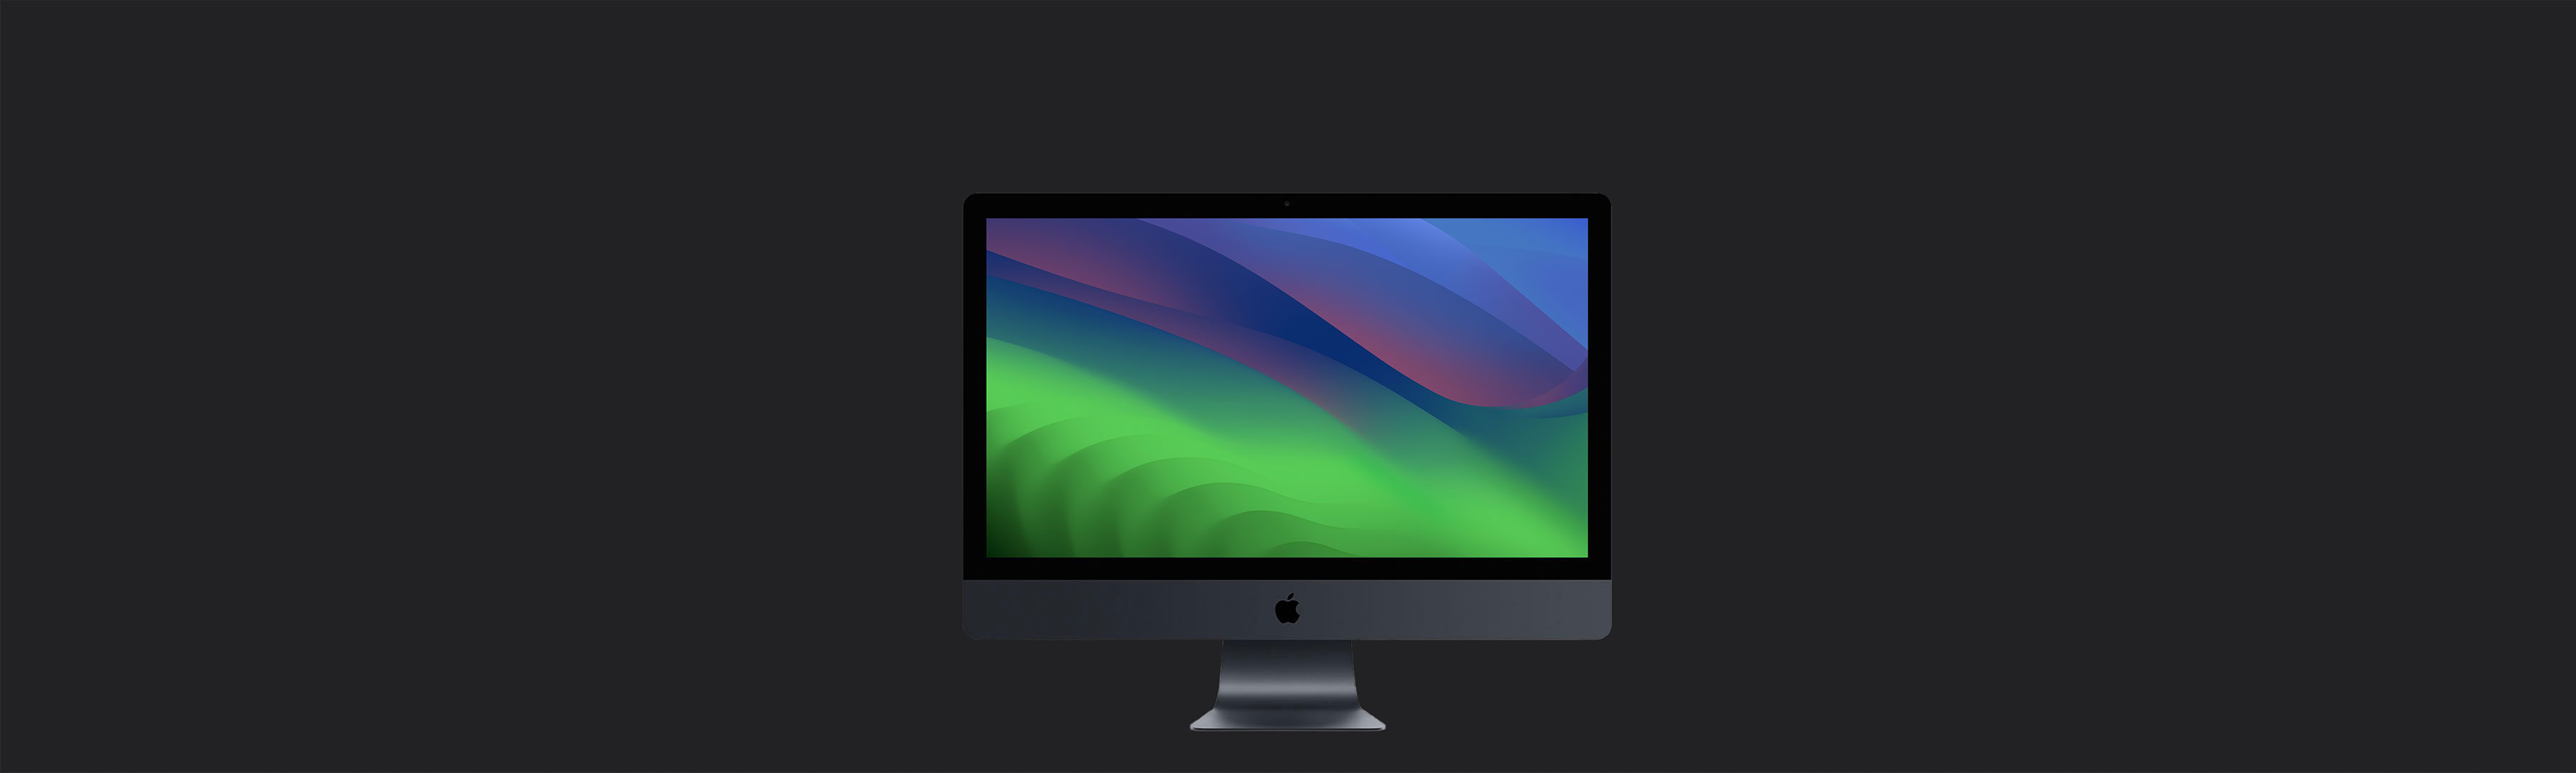 Mac Pro - Official Apple Support